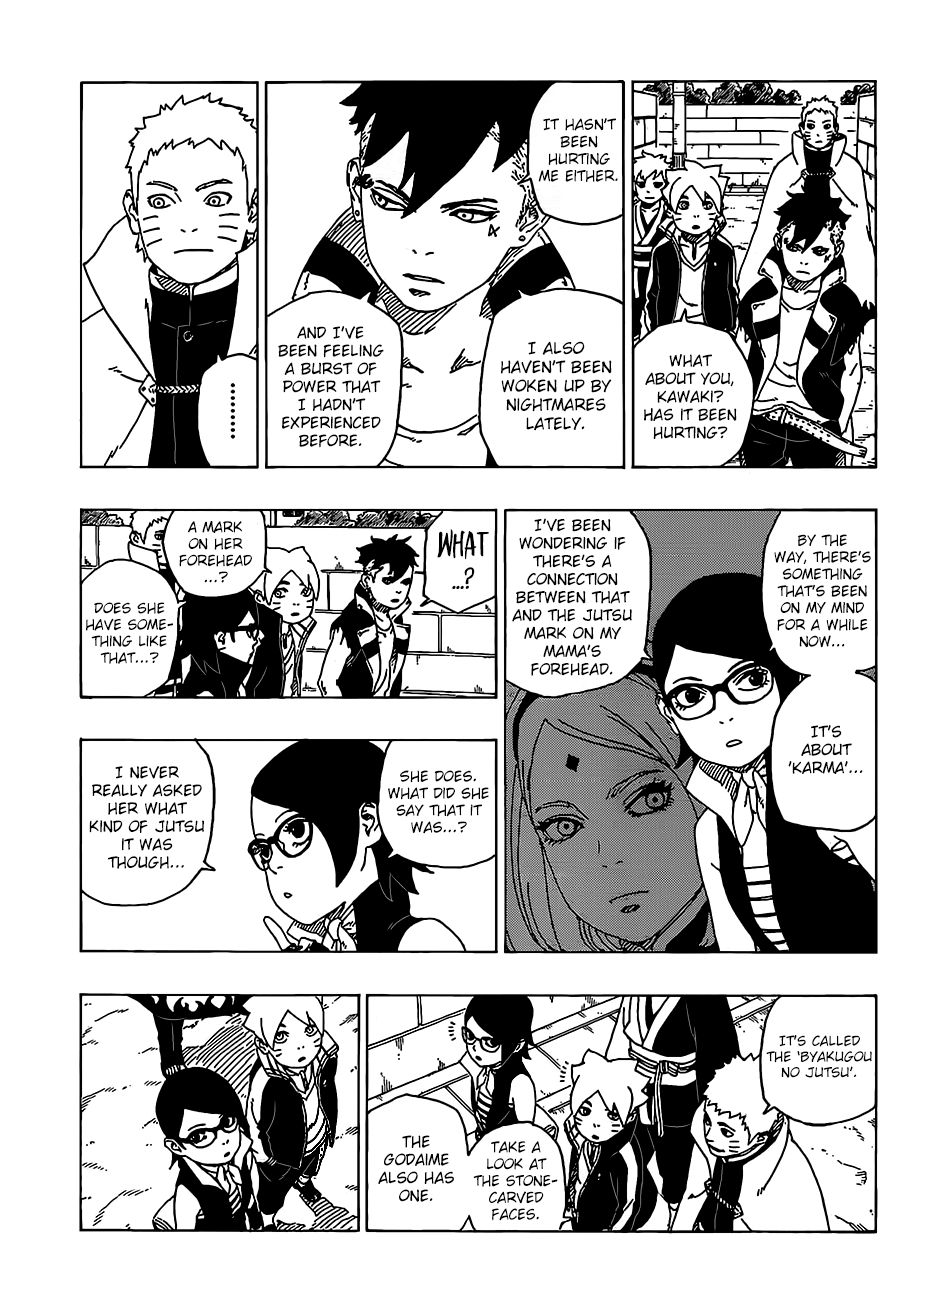 Boruto: Naruto Next Generations Chapter 35 : It's up to You | Page 24